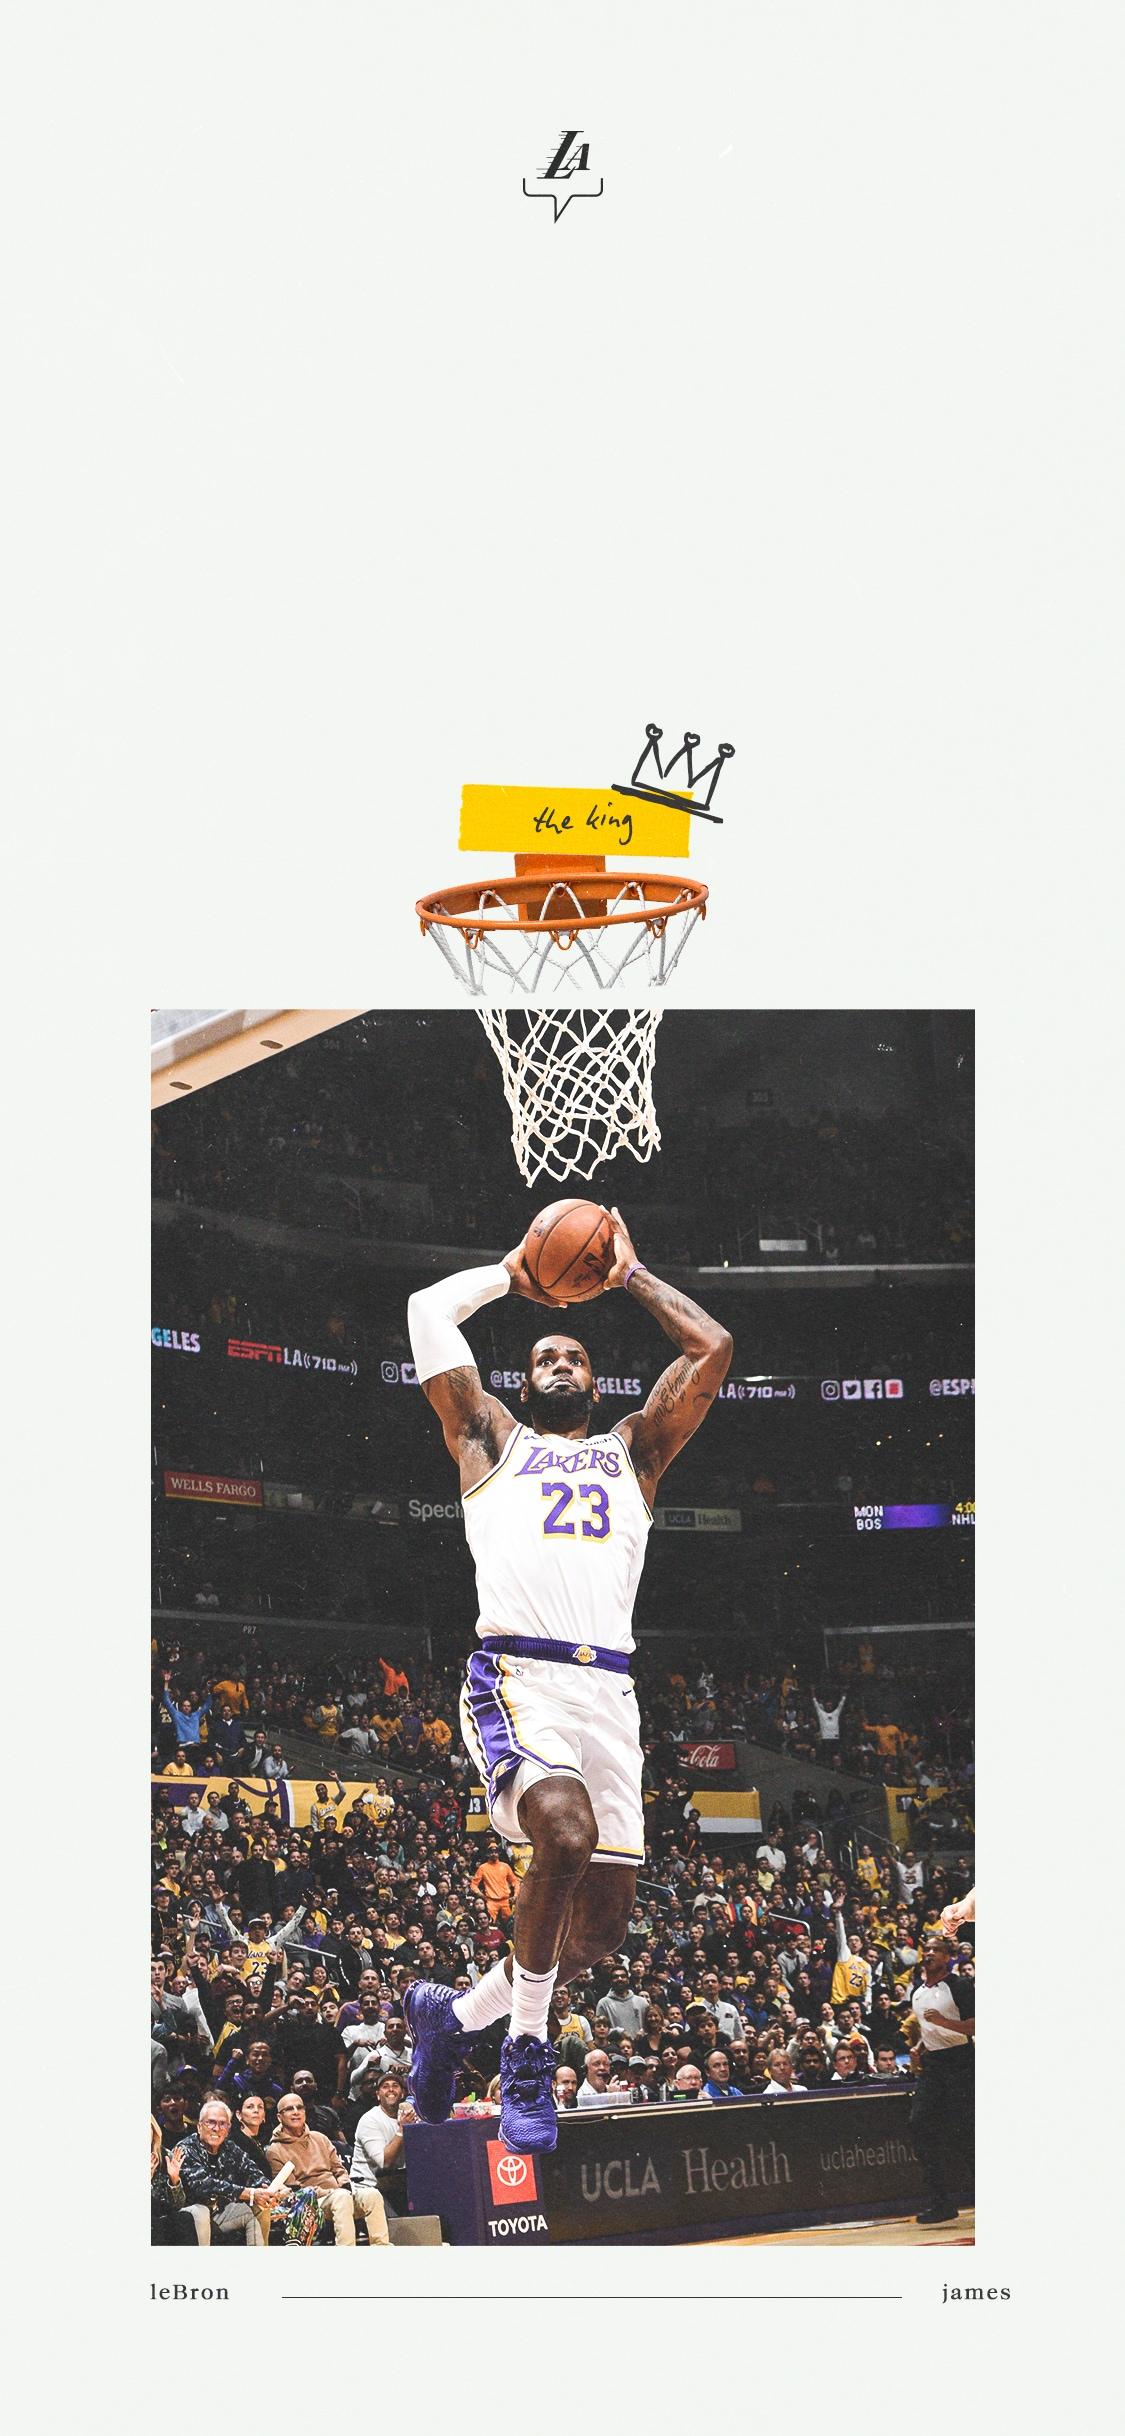 A poster of kobe bryant dunking over the basket - NBA, basketball